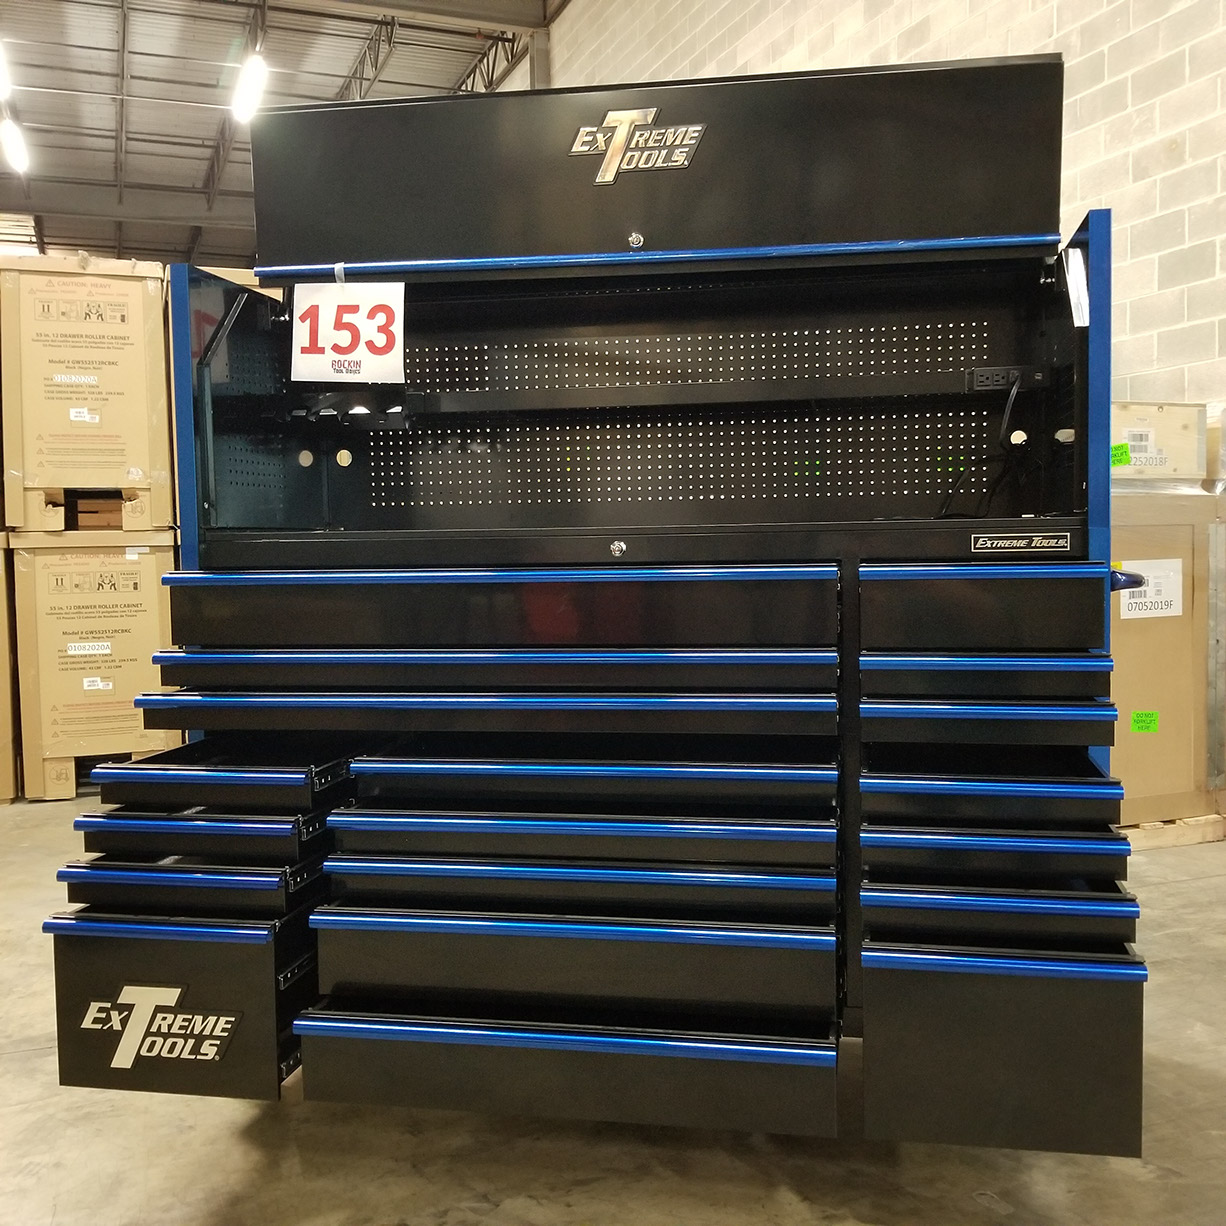 RTB Exclusive Combo: 72 Roller Tool Cabinet, Top Hutch, 2 Side Lockers